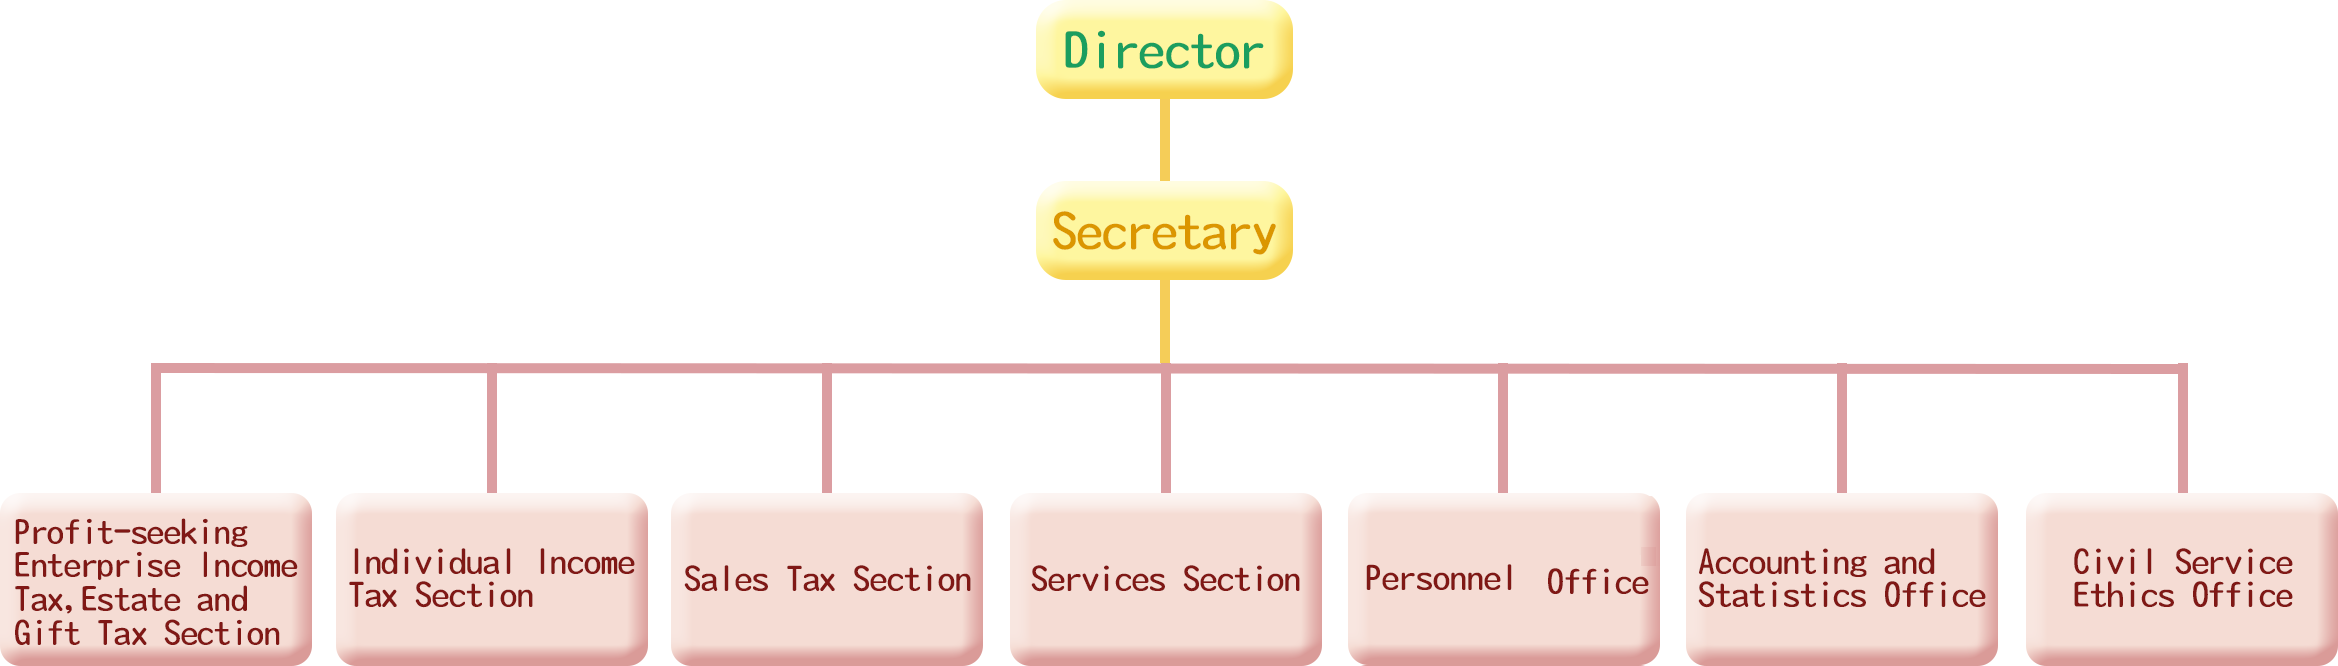 Organization Structure of Yunlin Branch.png